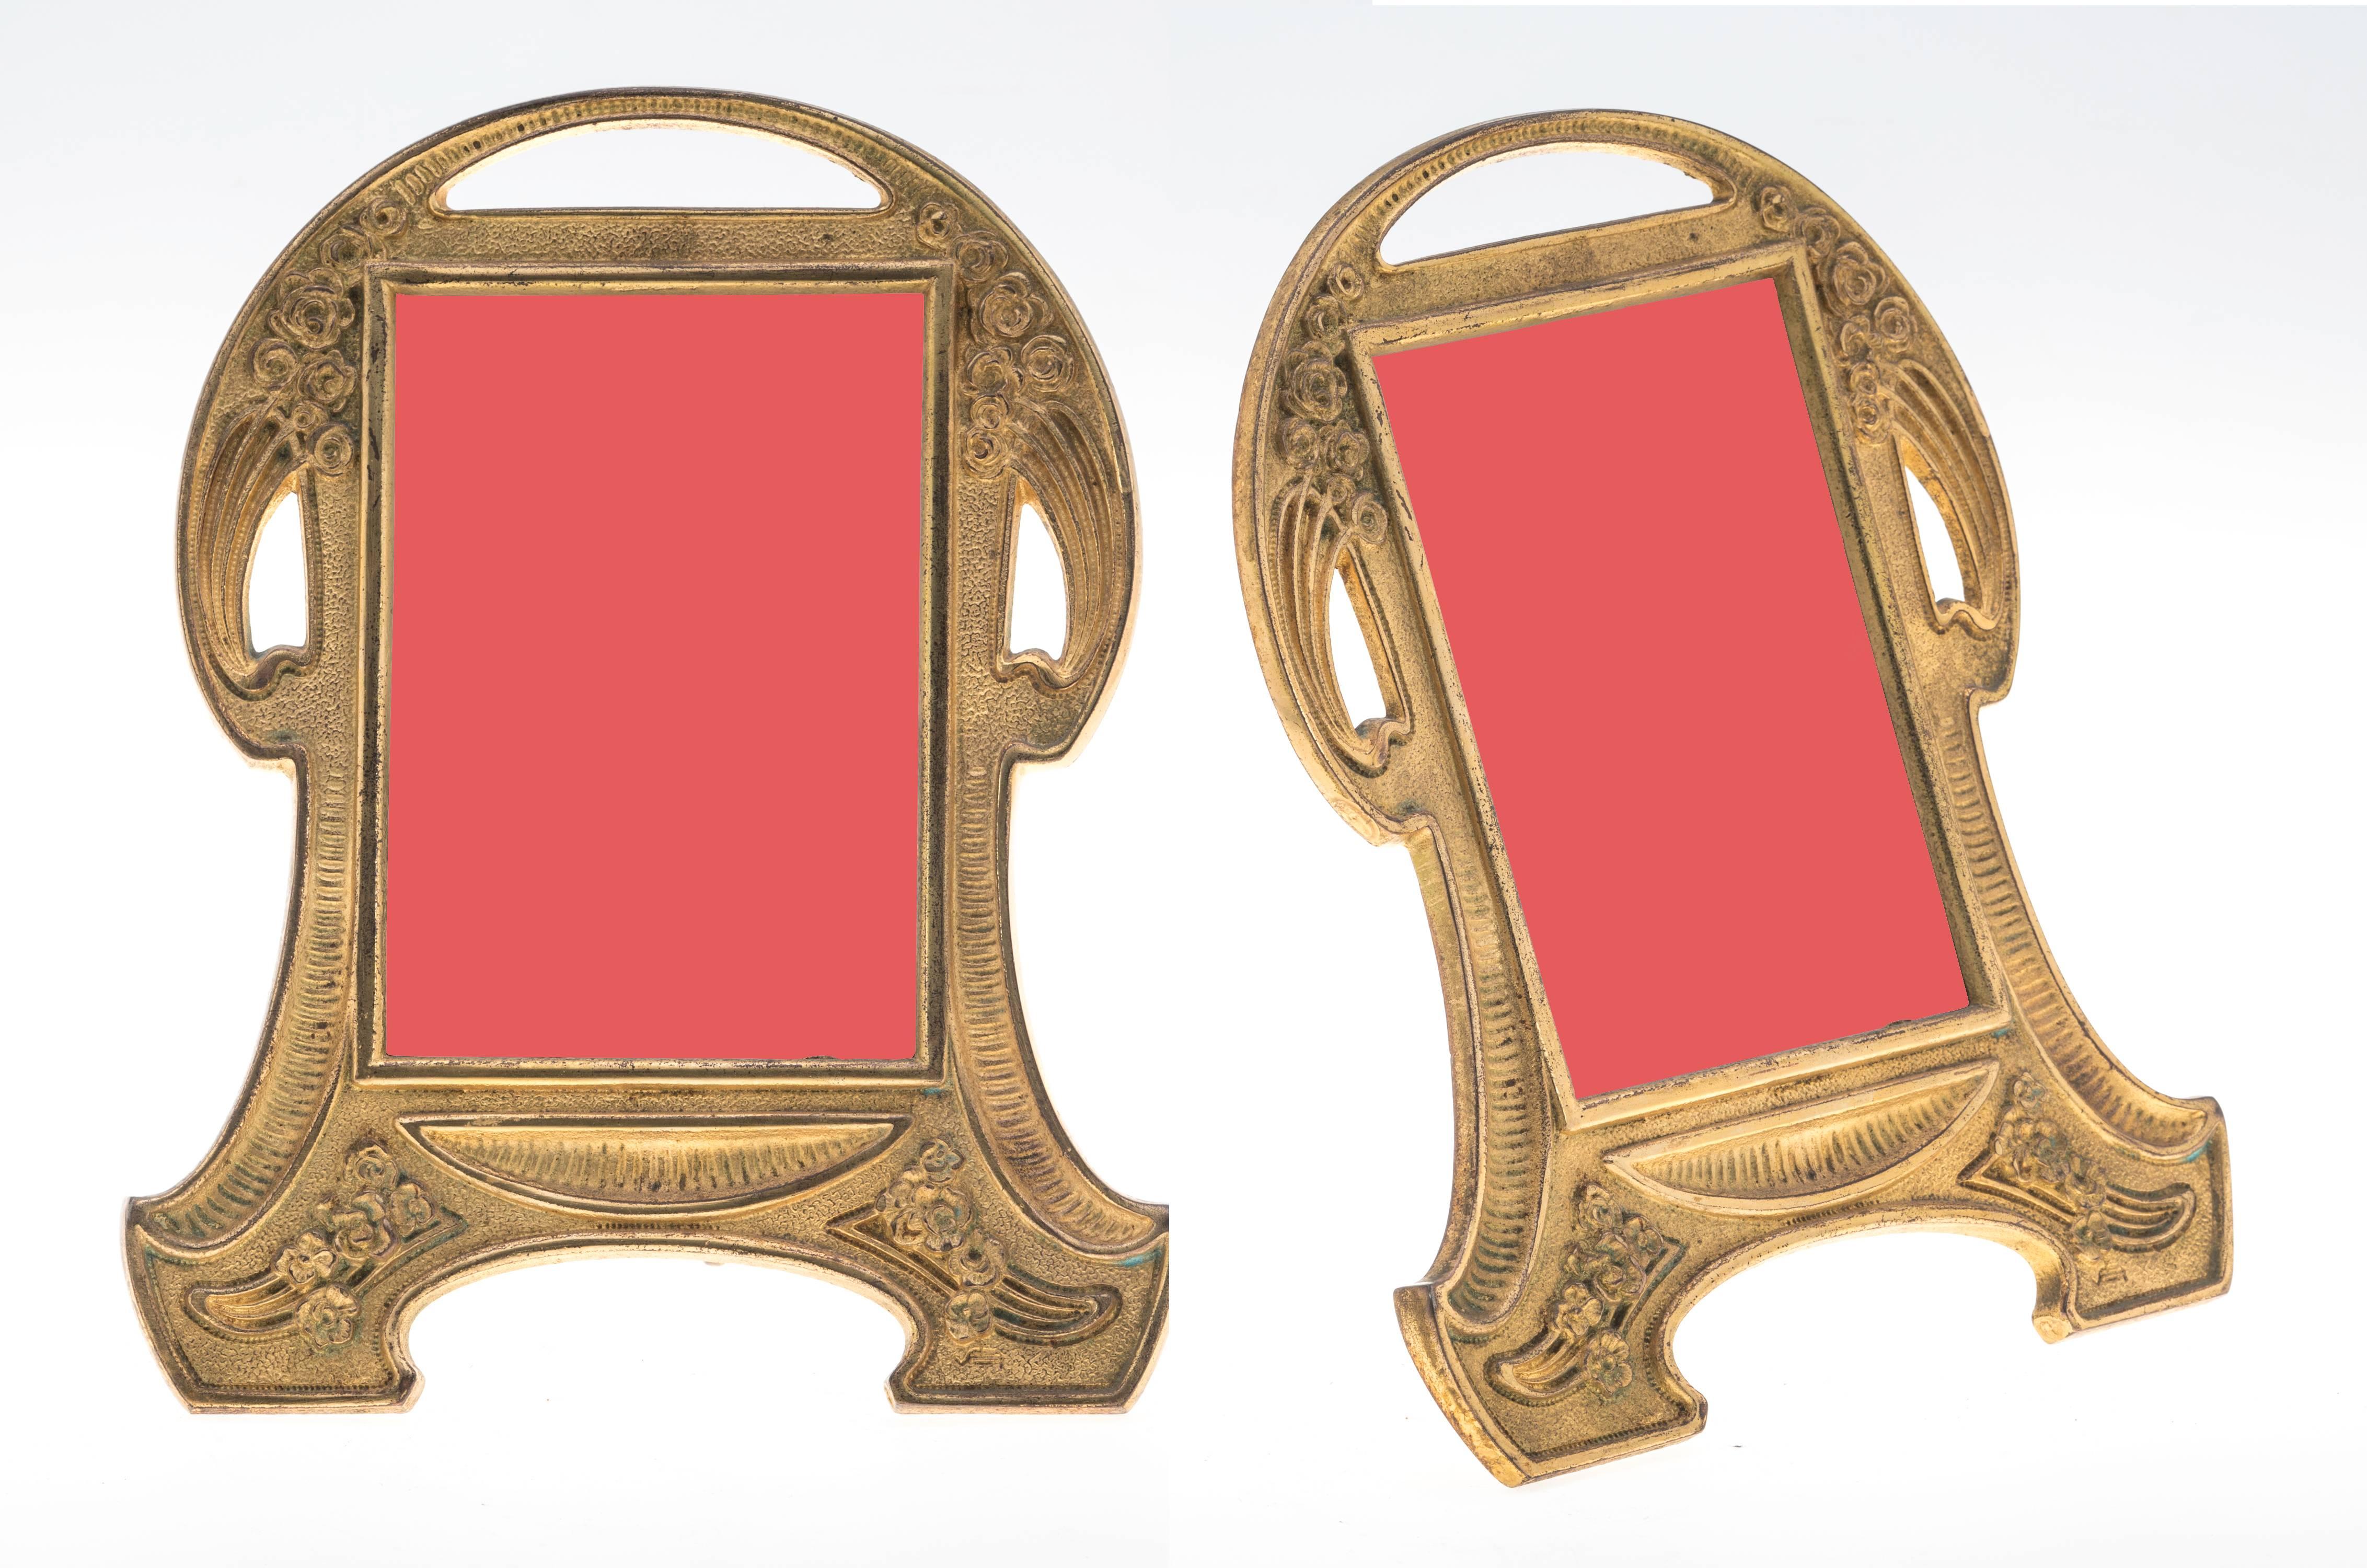 Antique Art Nouveau gilt bronze picture frames. Sold as pair. Very hard to find, lovely pair.